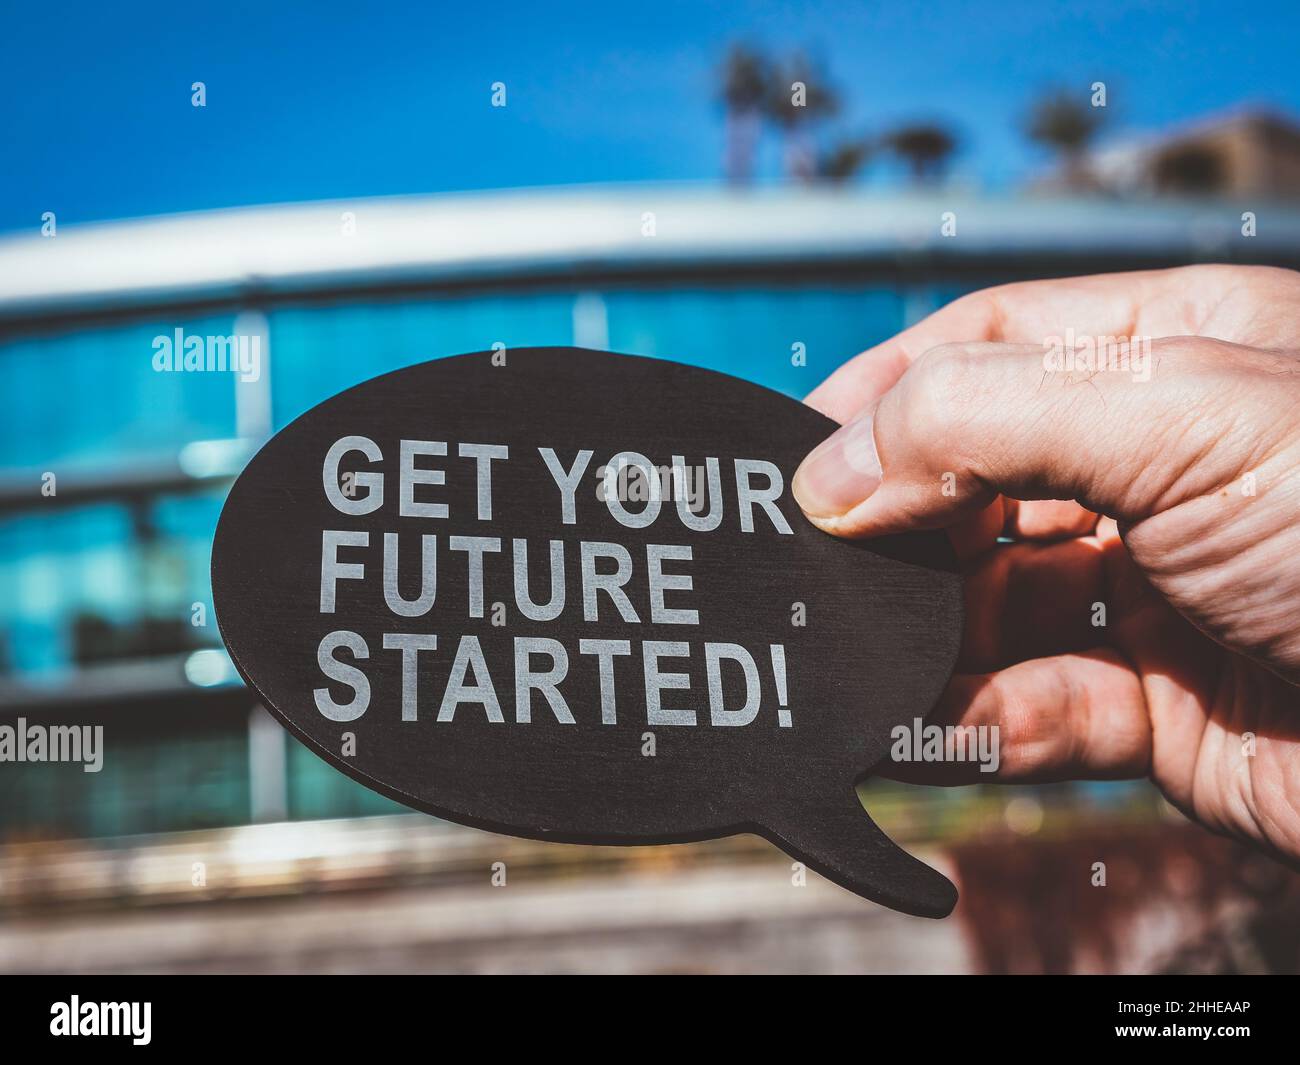 Get your future started. Man holds bubble quote. Stock Photo